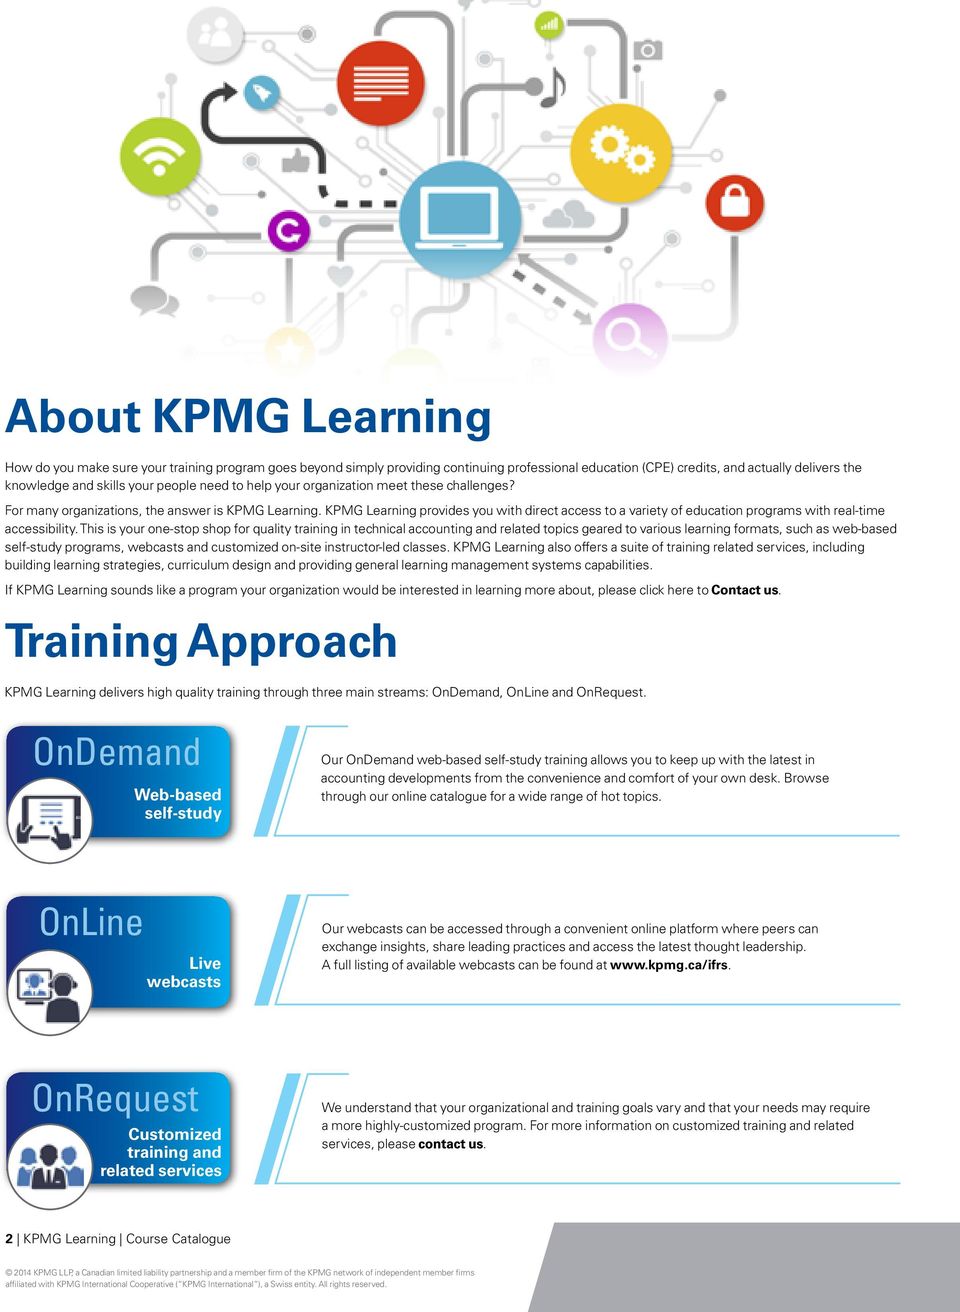 KPMG Learning provides you with direct access to a variety of education programs with real-time accessibility.